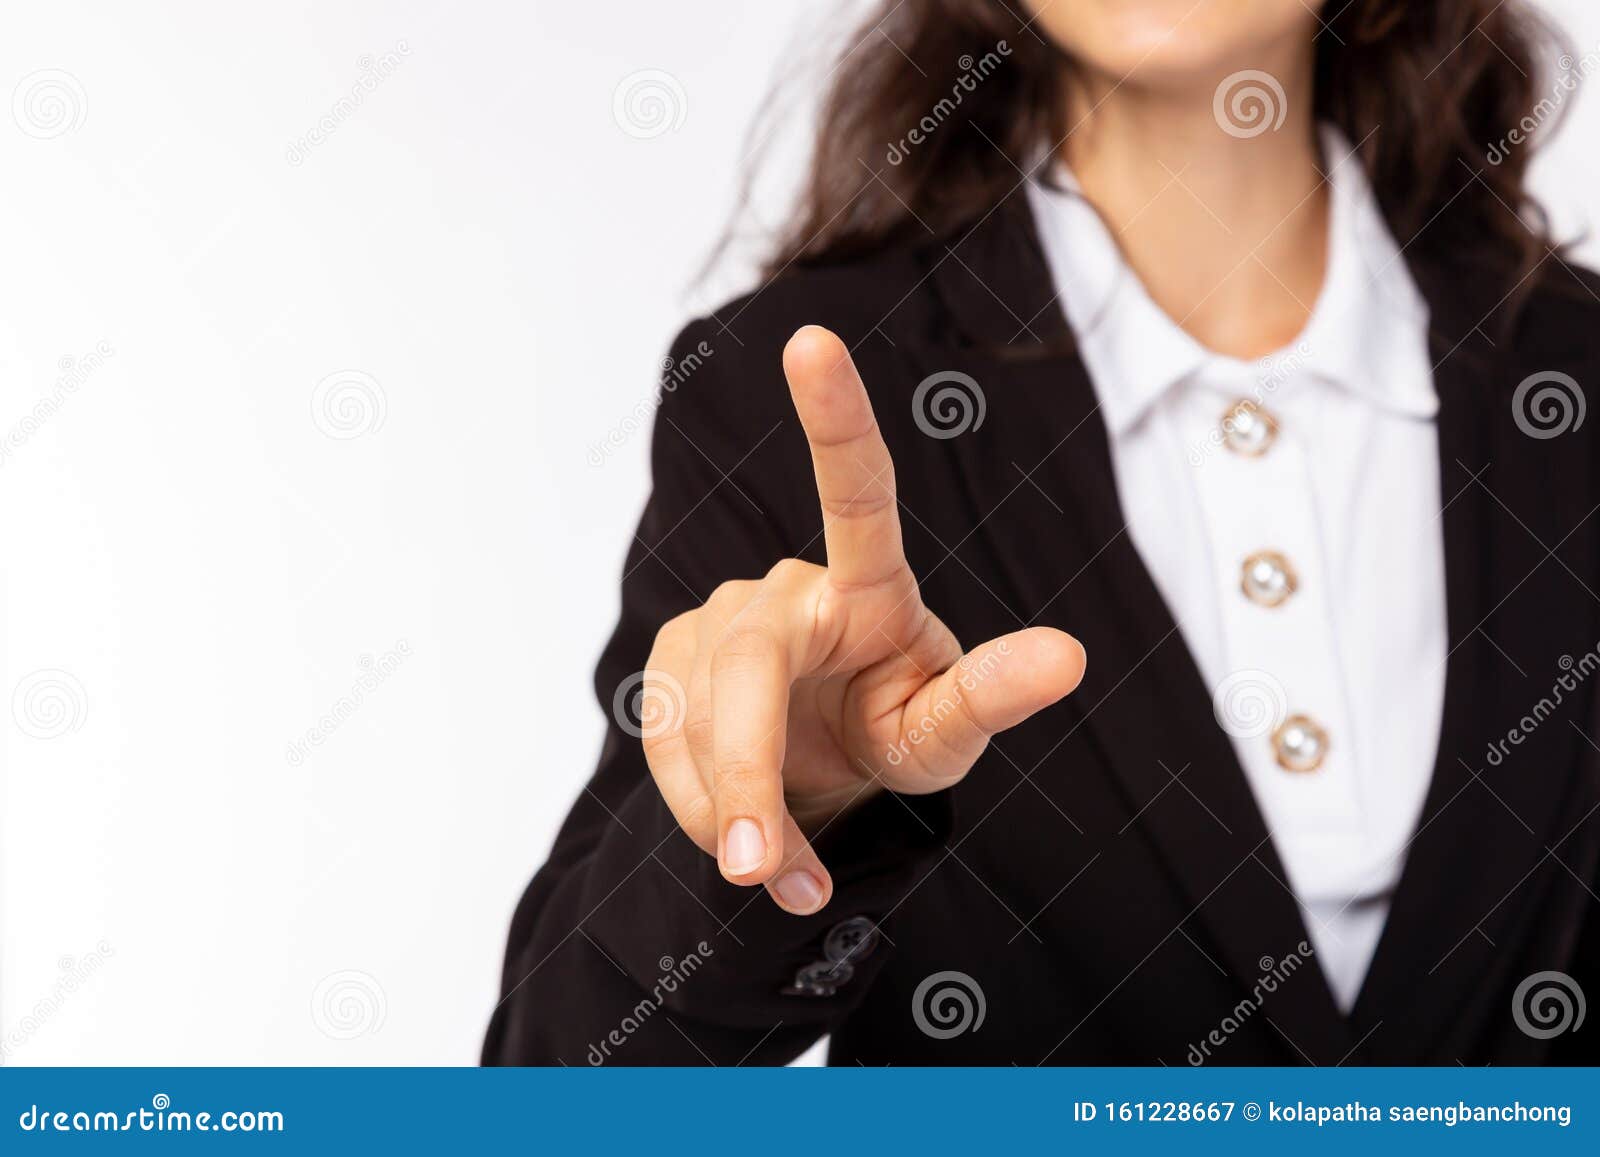 Businesswoman Push Finger To Touchscreen Collect Something Business